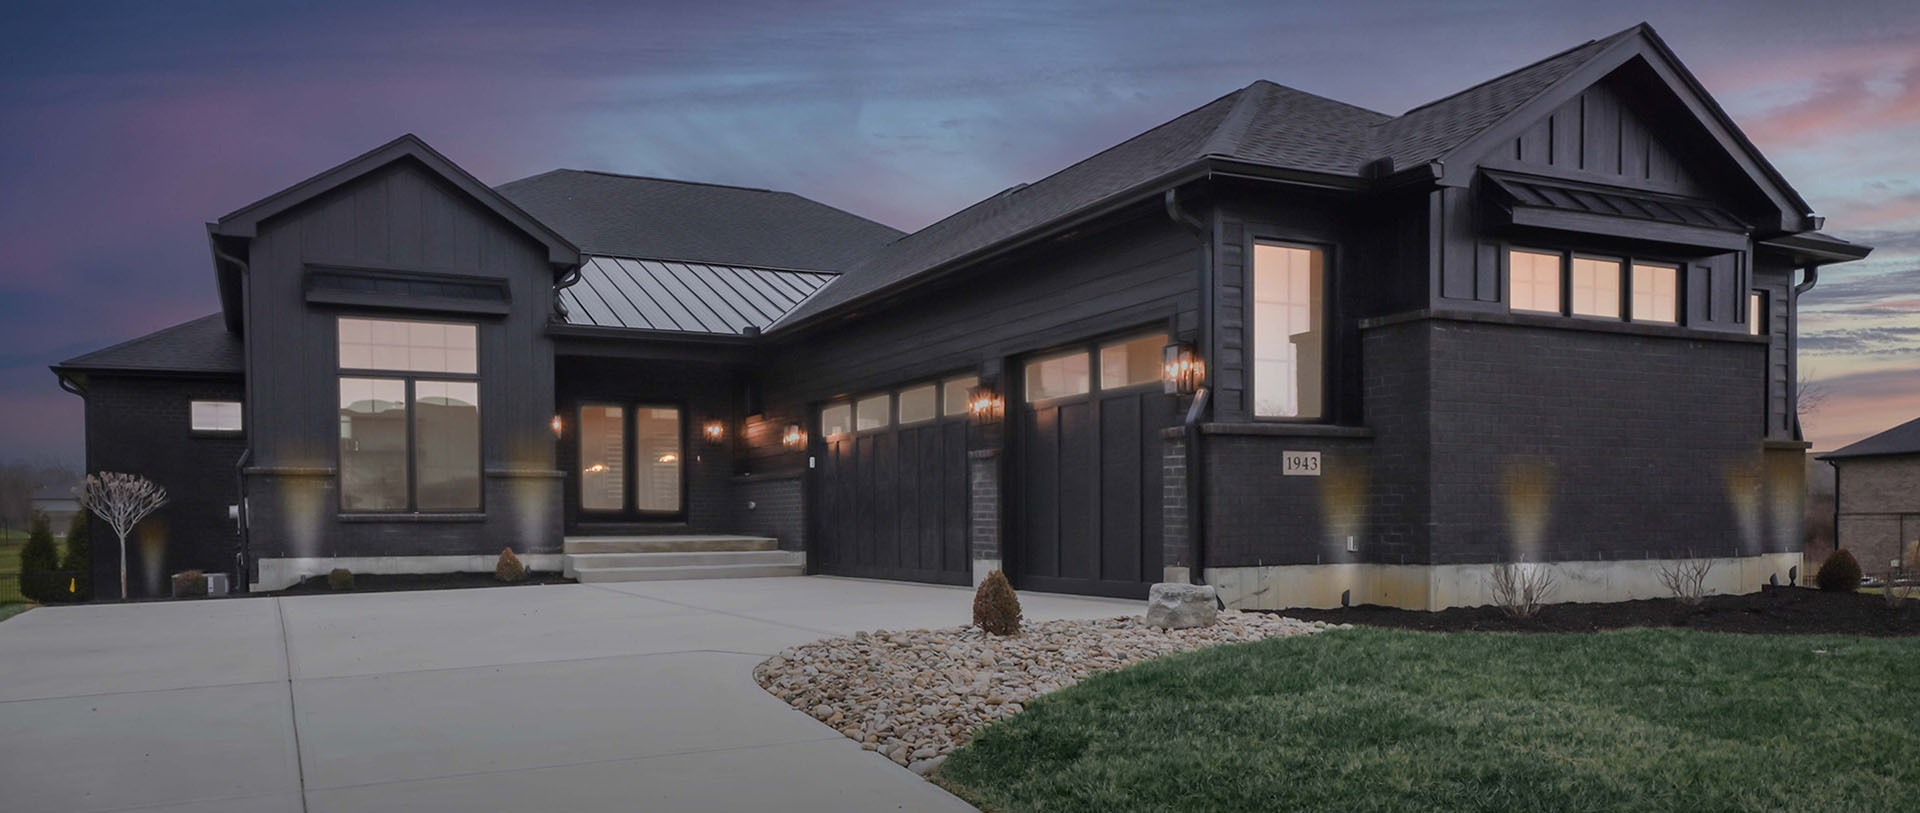 Design Homes Lot 249 exterior front of home at night